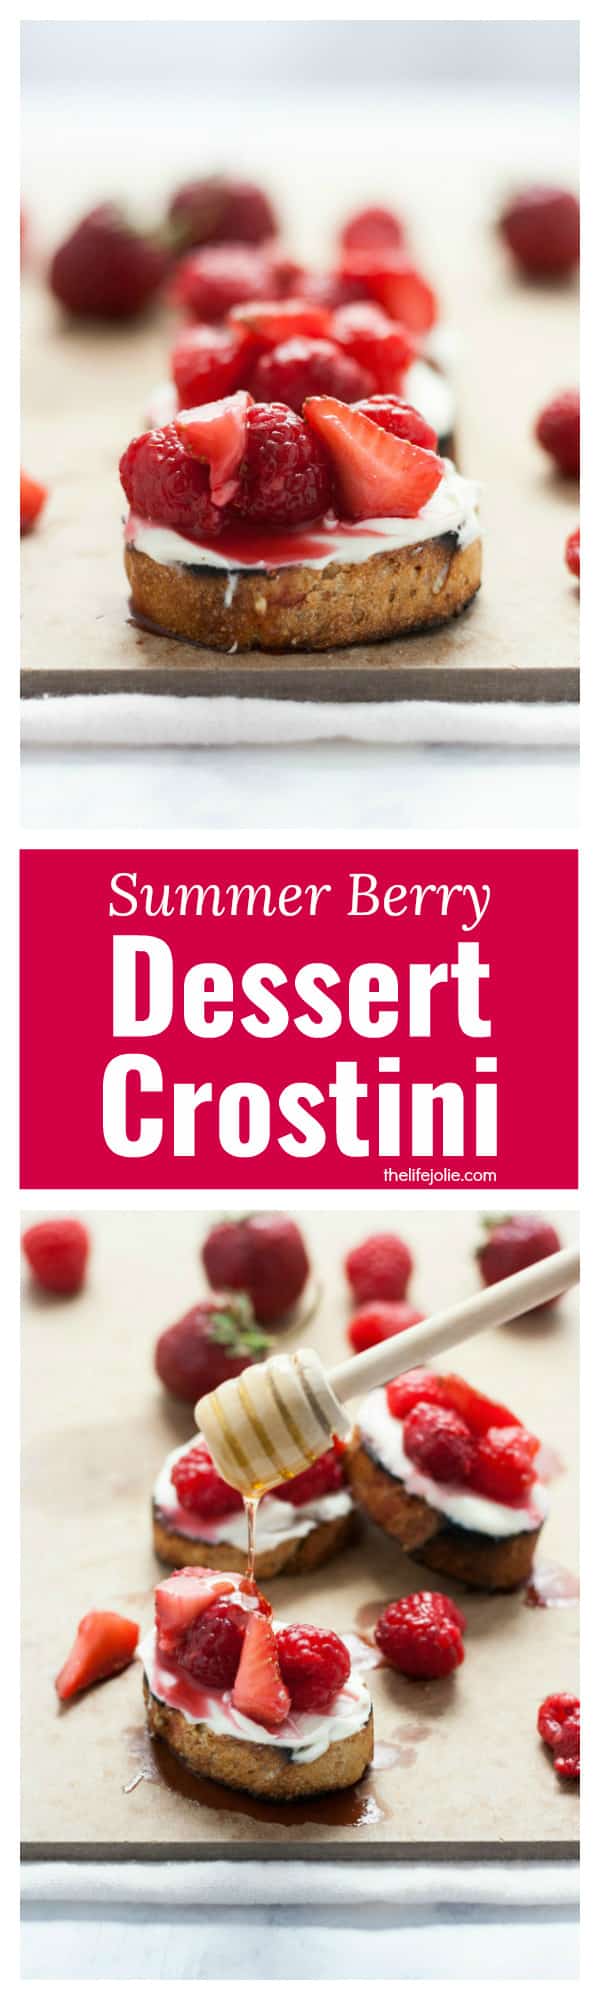 This Summer Berry Dessert Crostini recipe is a light and delicious summer dessert. You can also call it dessert bruschetta. It uses ripe summer berries, mascarpone cheese sweetened with honey and grilled baguette. This easy dessert is super quick to make and a real crowd pleaser!